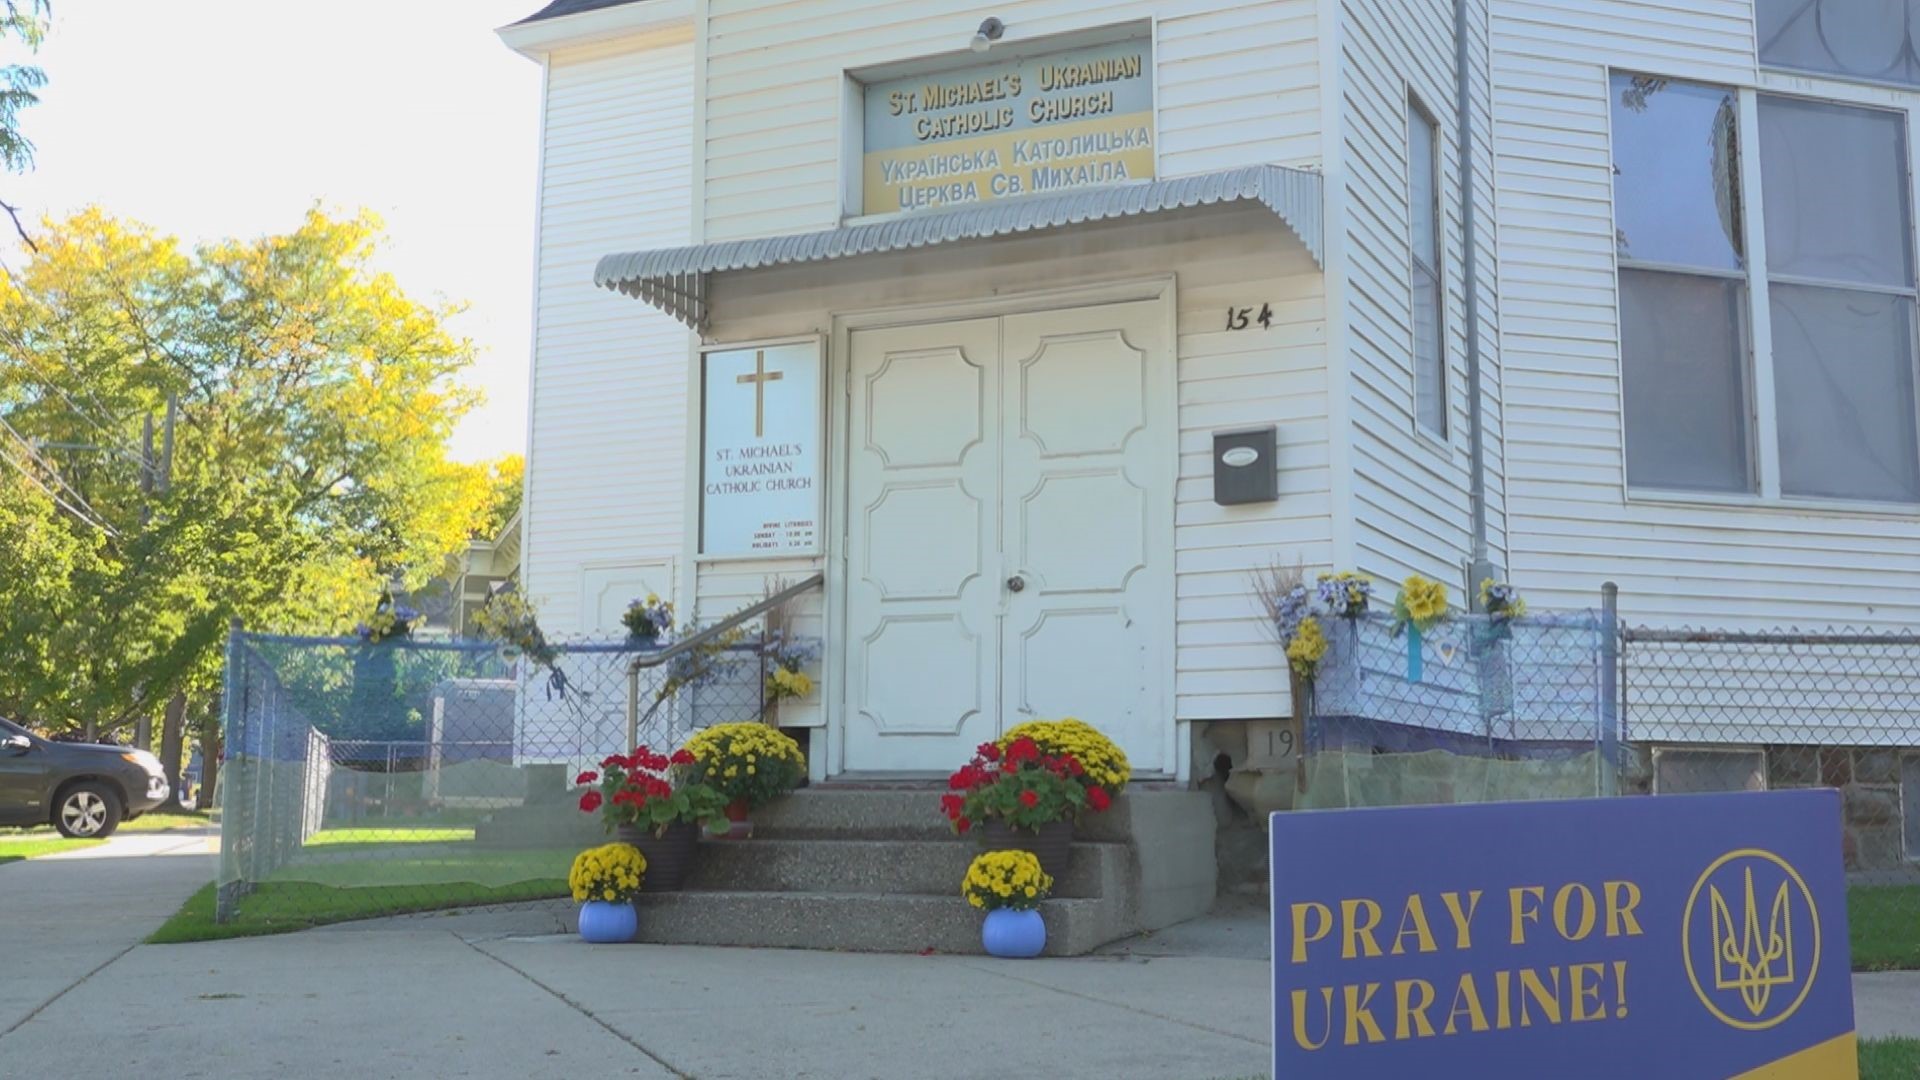 Following a fundraiser to benefit the people of Ukraine, a Grand Rapids pastor explains how his community is aiding Ukrainian soldiers still fighting for freedom.